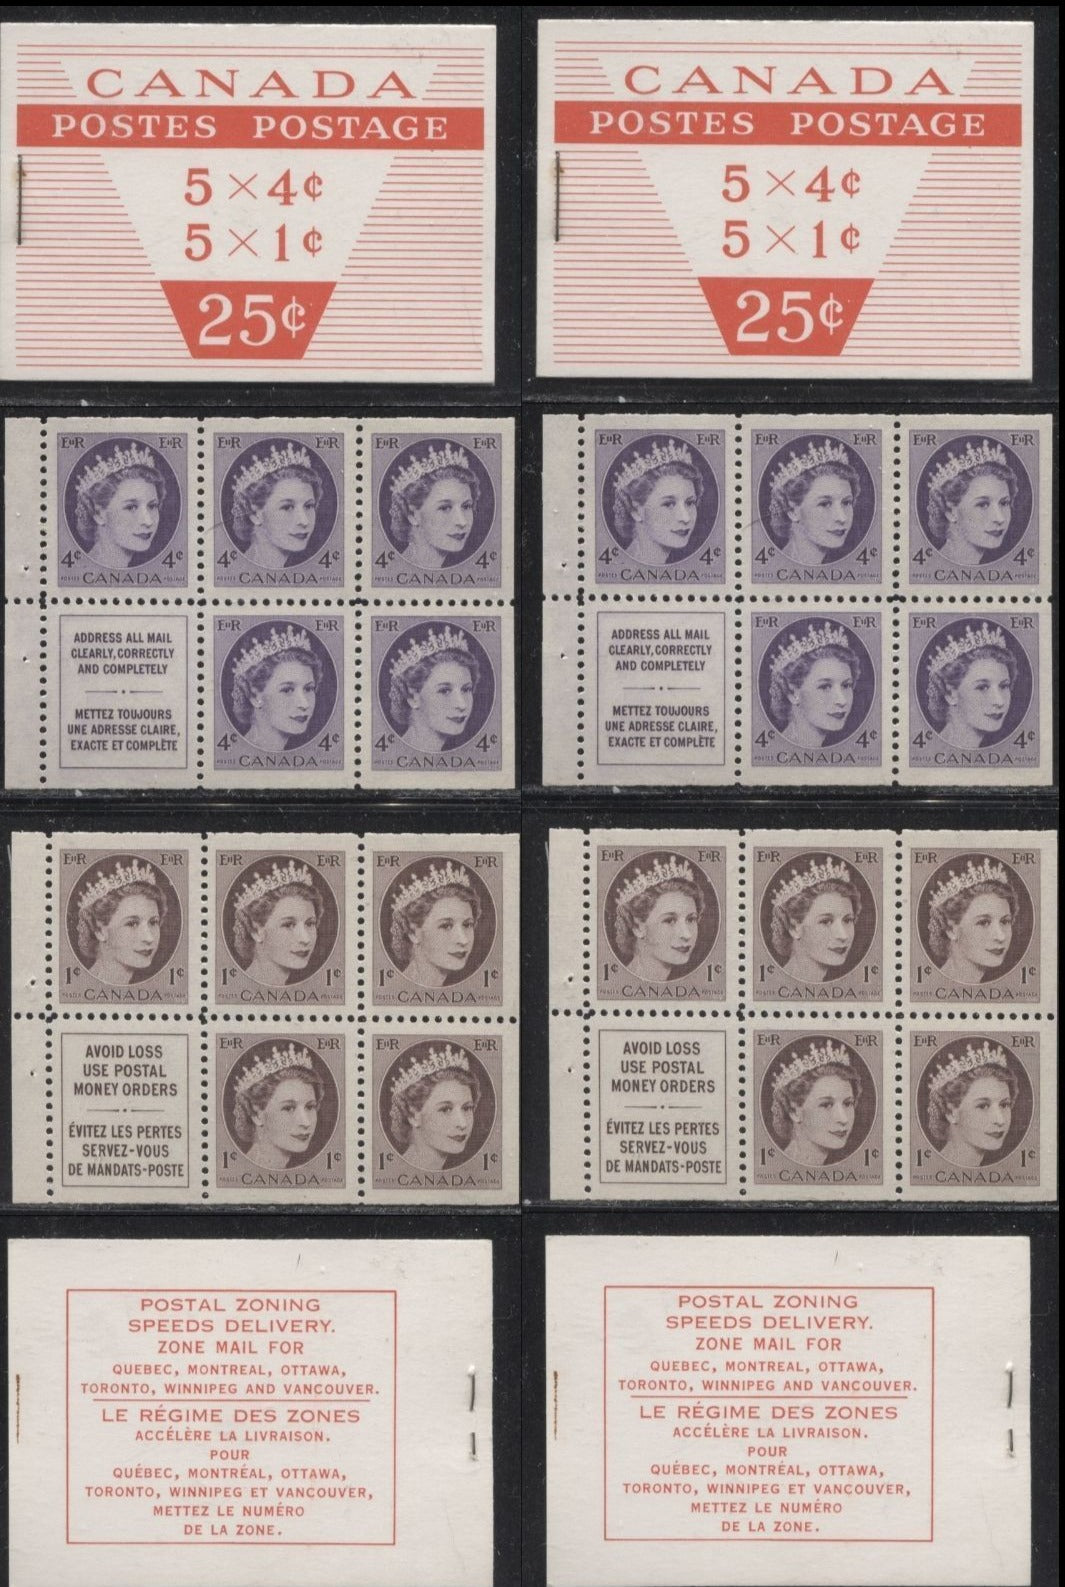 Lot 194 Canada McCann #BK51i 1954-1962 Wilding Issue, Complete 25c Booklet Containing 1 Pane of 5 + Label of Each of the 1c & 4c Queen Elizabeth II, DF Smooth Paper, 12 mm Staple, Two Different Cover Fluorescences